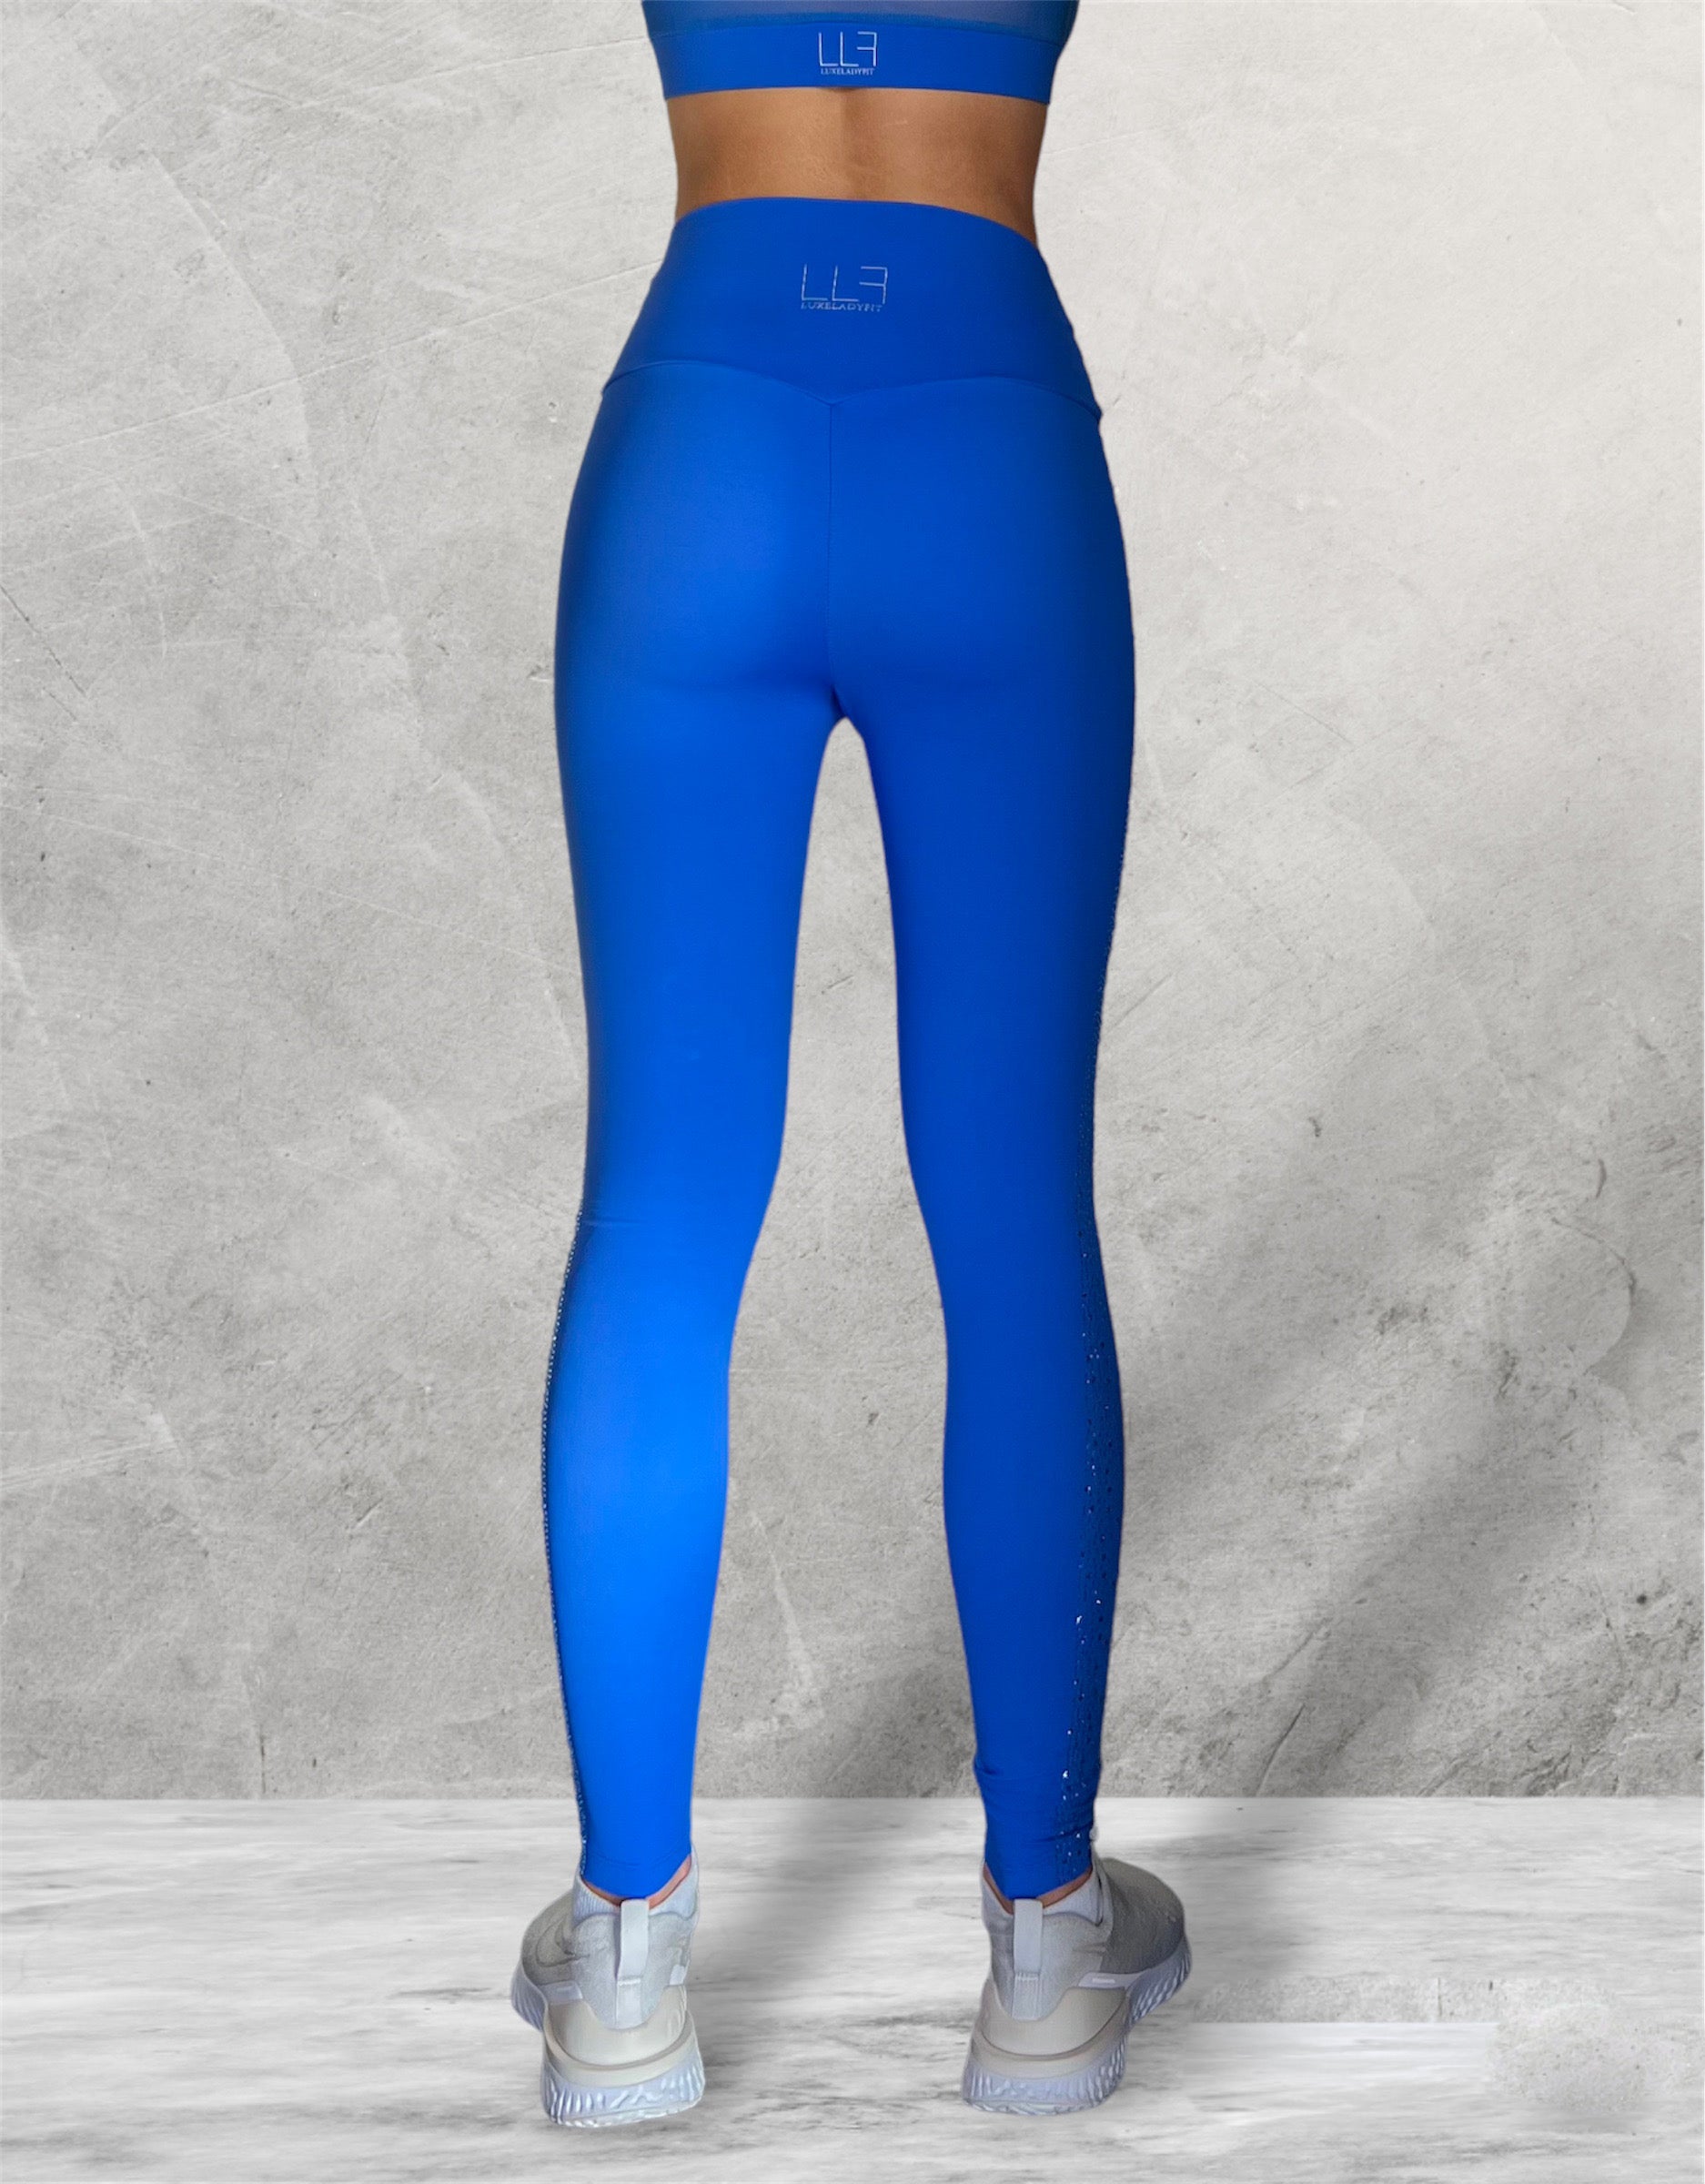 Are you ready to be watched 24/7? With LuxeLadyFit's leggings, you hav